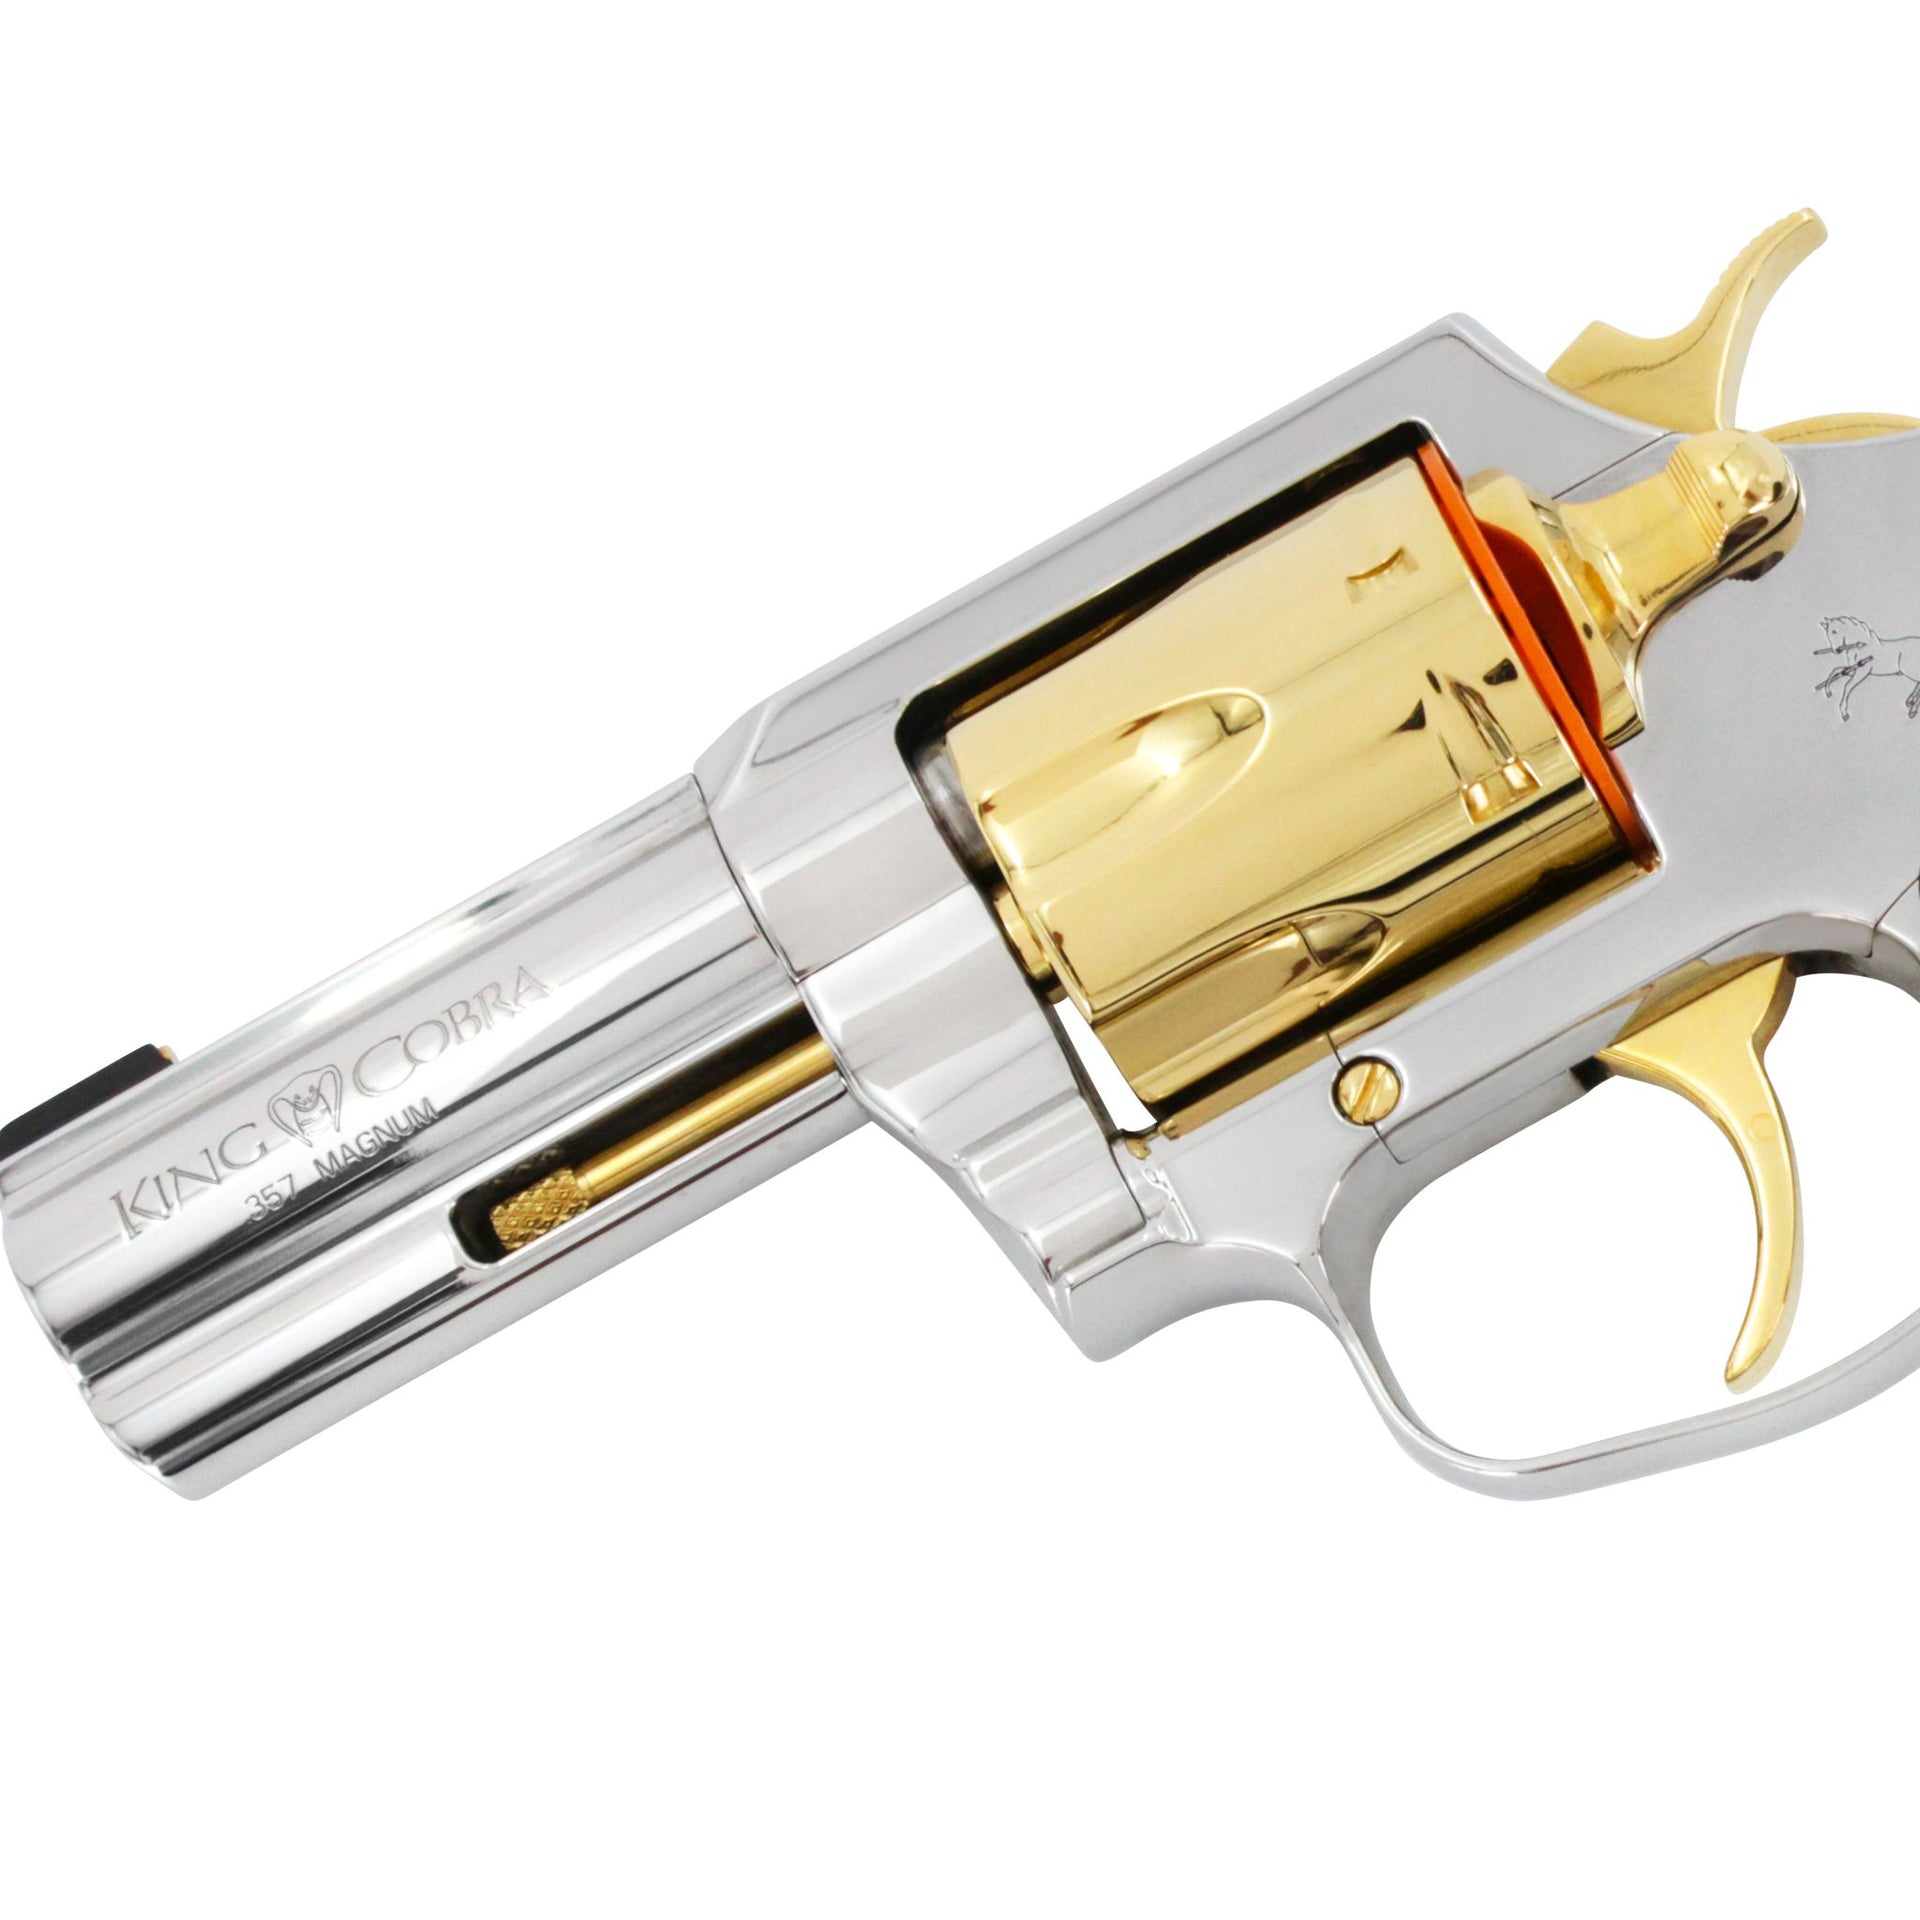 Colt King Cobra, 3", 357 Magnum, High Polish Stainless Steel, with 24K Gold Accents